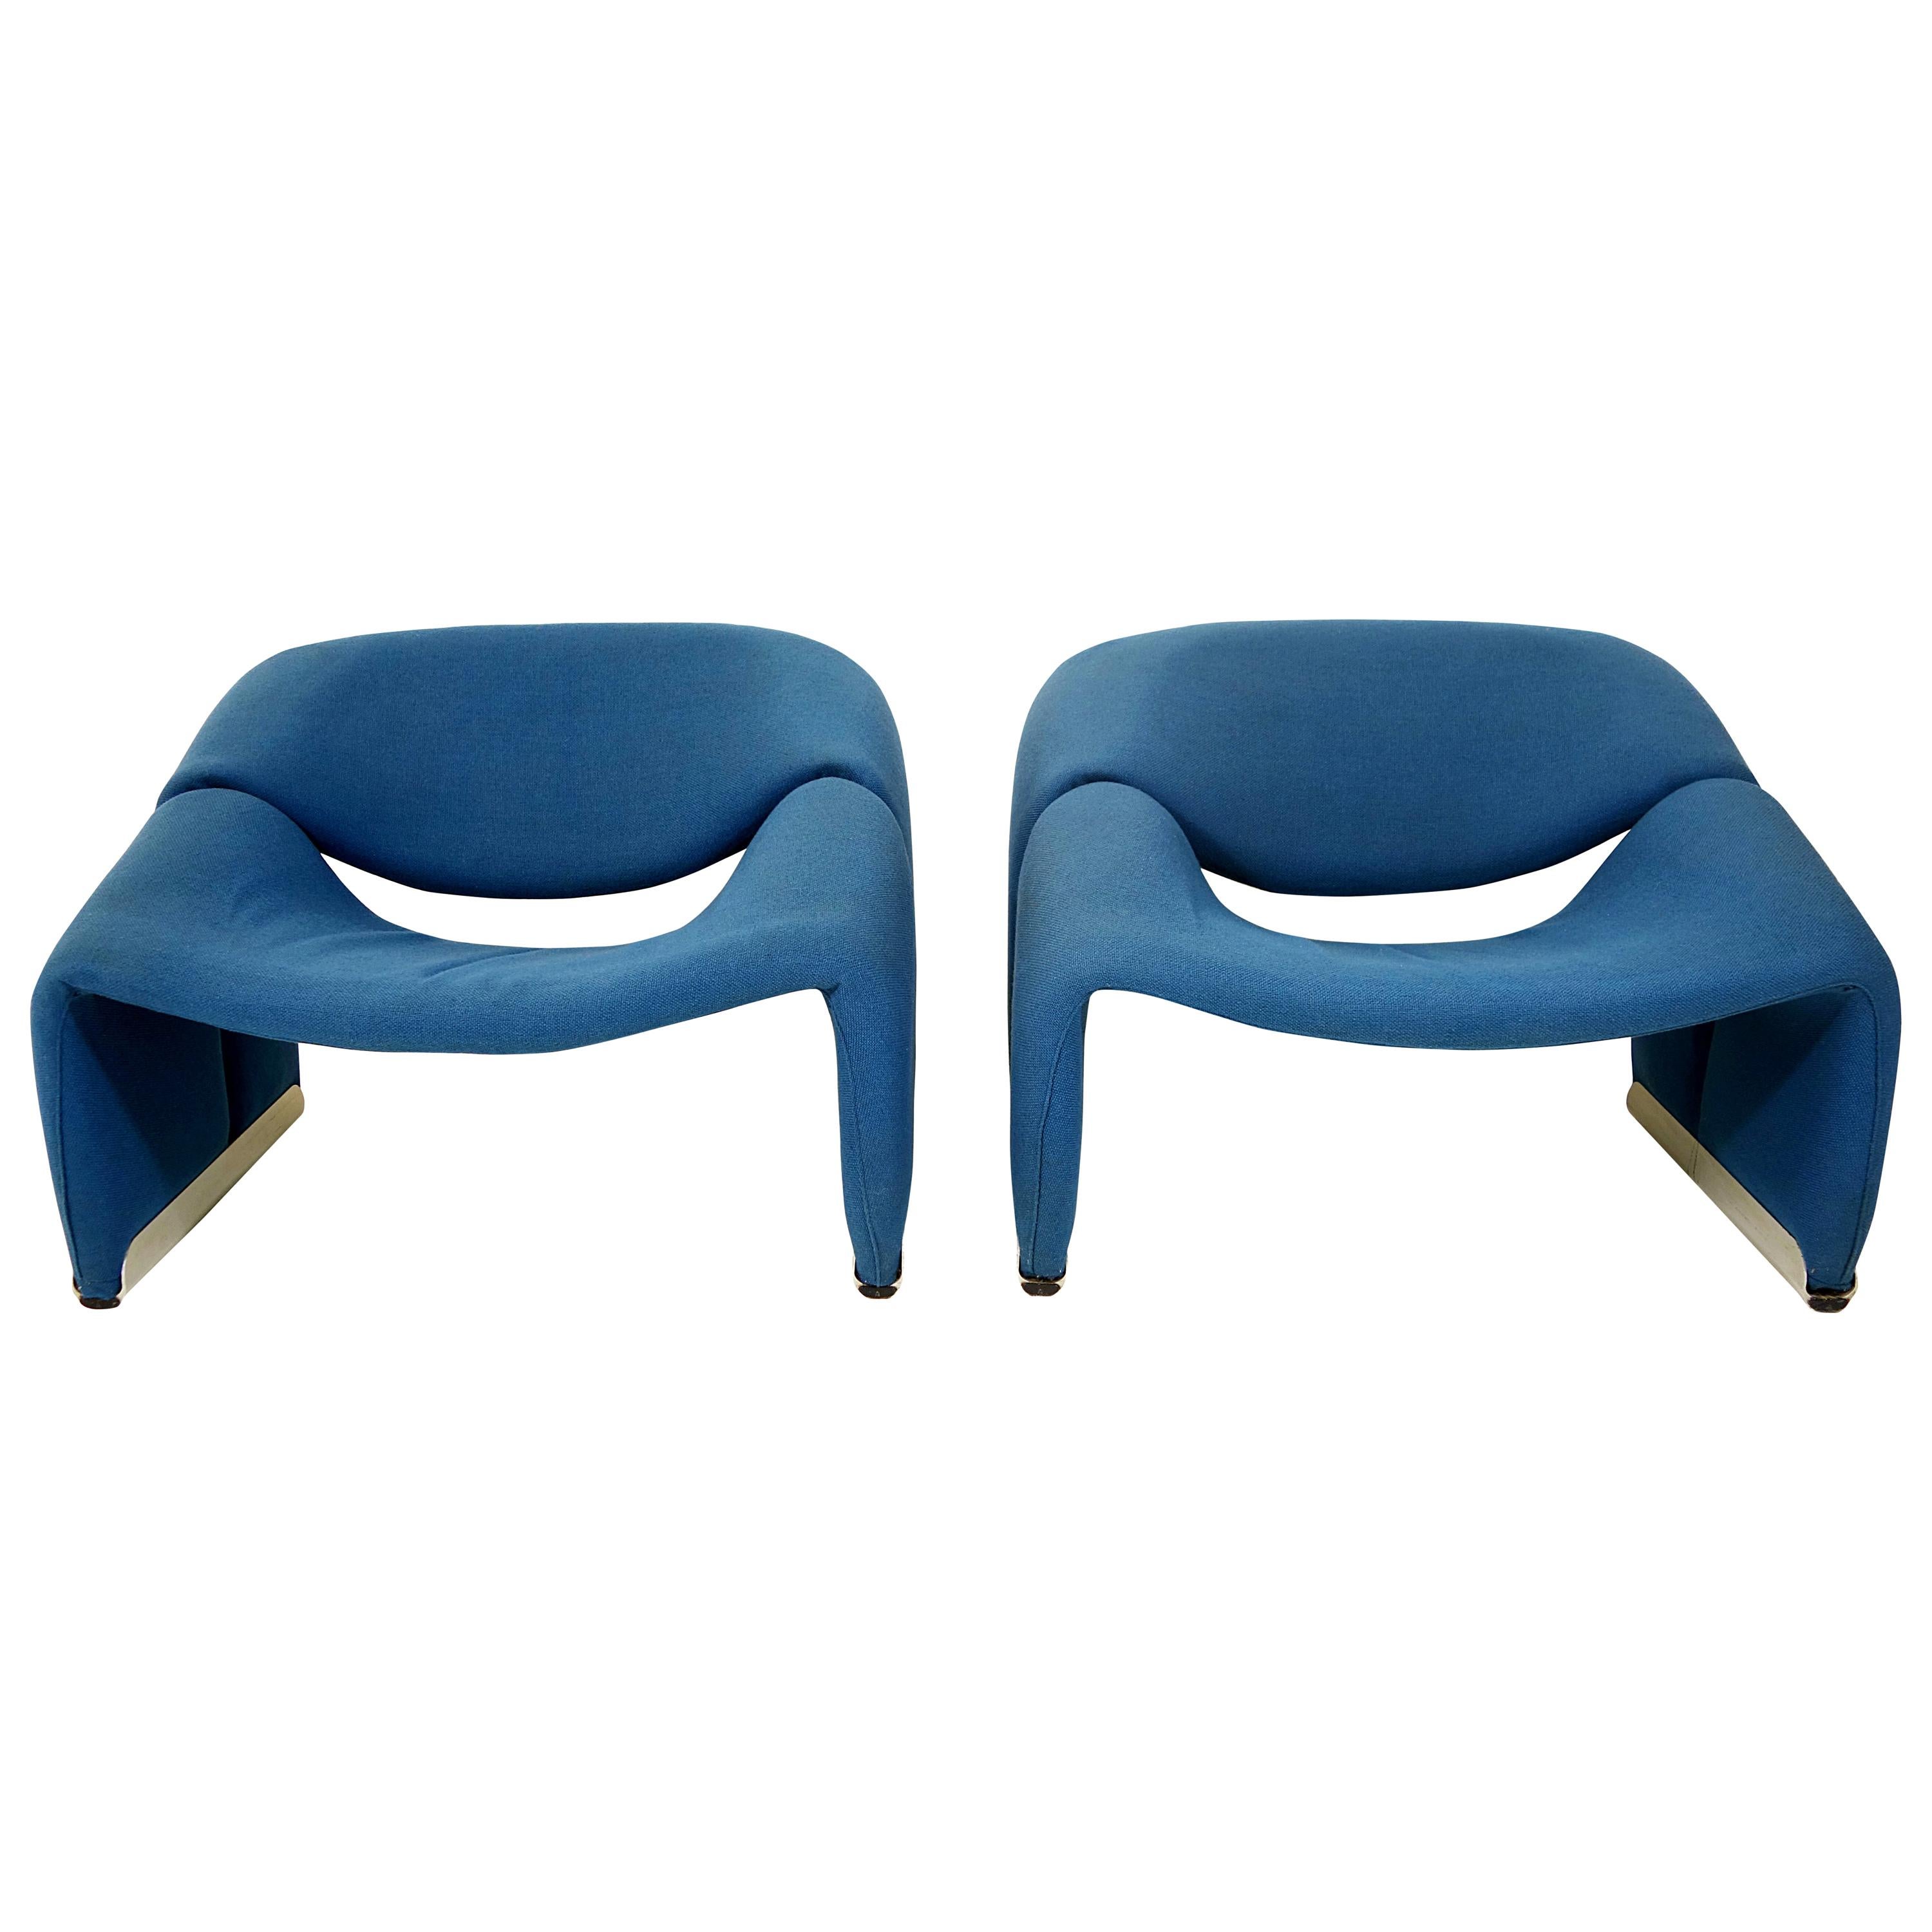 Pair of Blue Midcentury Groovy Chairs F598 by Pierre Paulin for Artifort